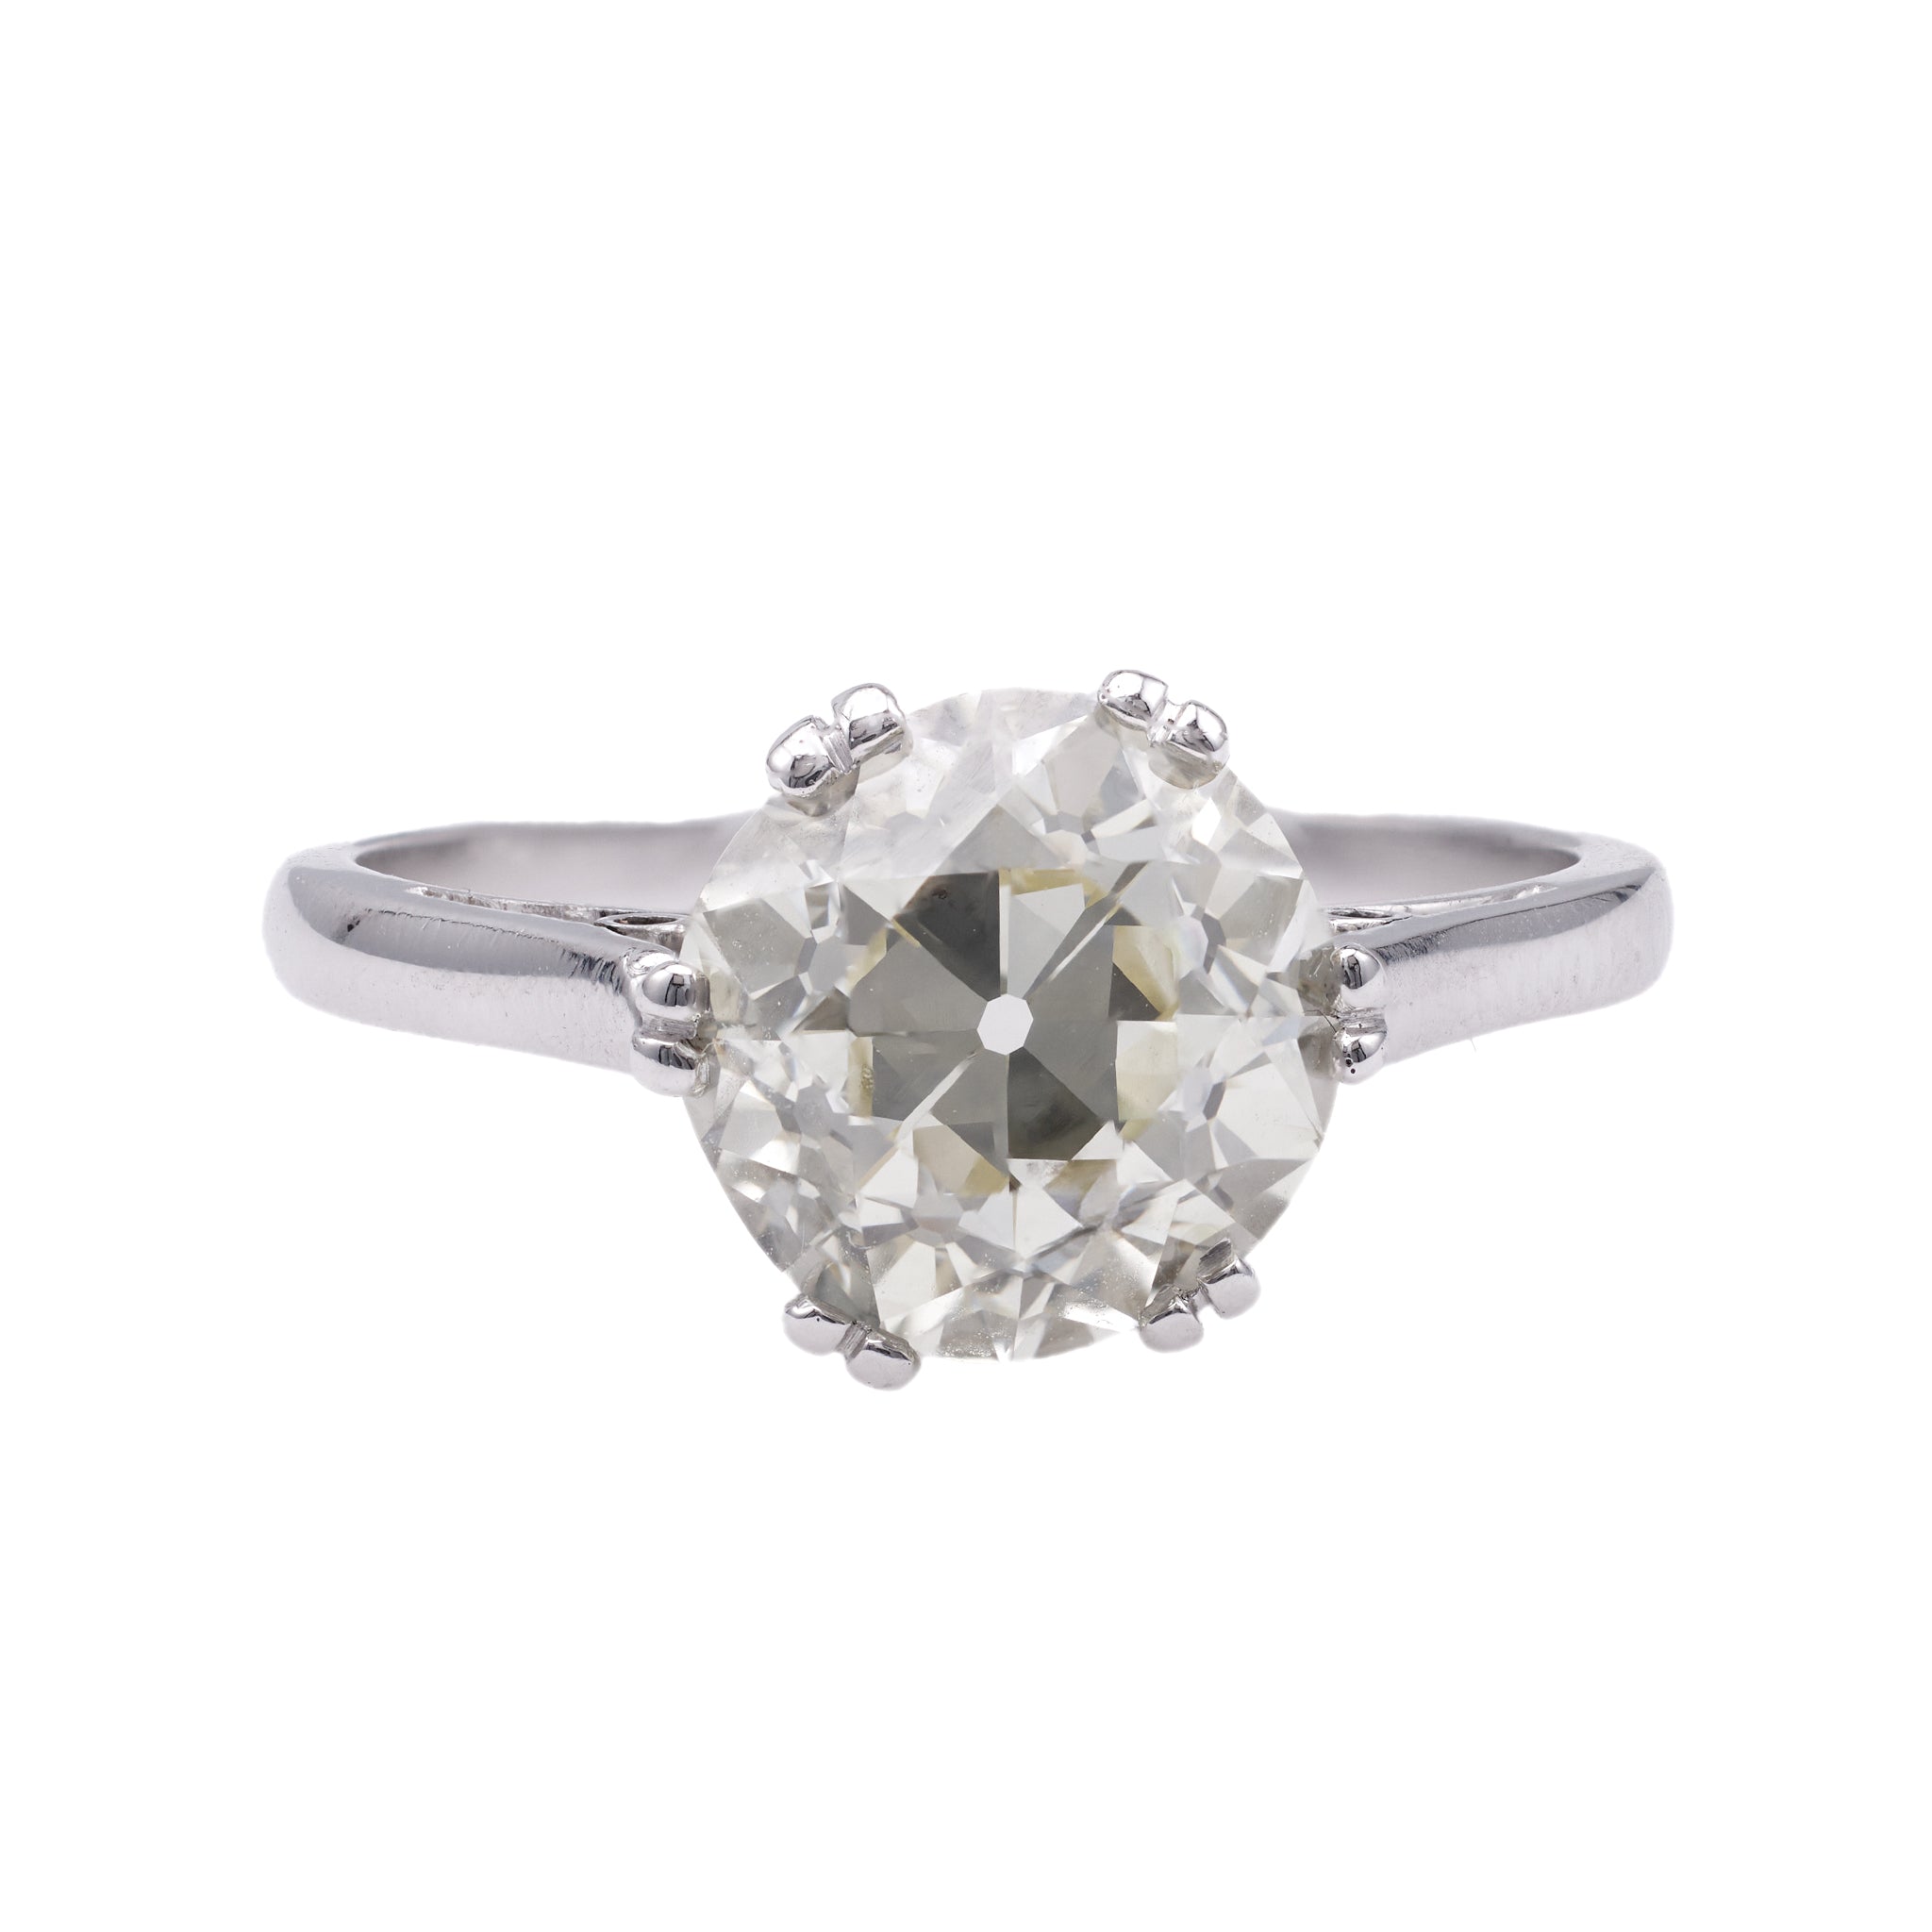 Art Deco French GIA 3.25 Carat Old European Cut Diamond Platinum Solitaire Ring Rings Jack Weir & Sons   